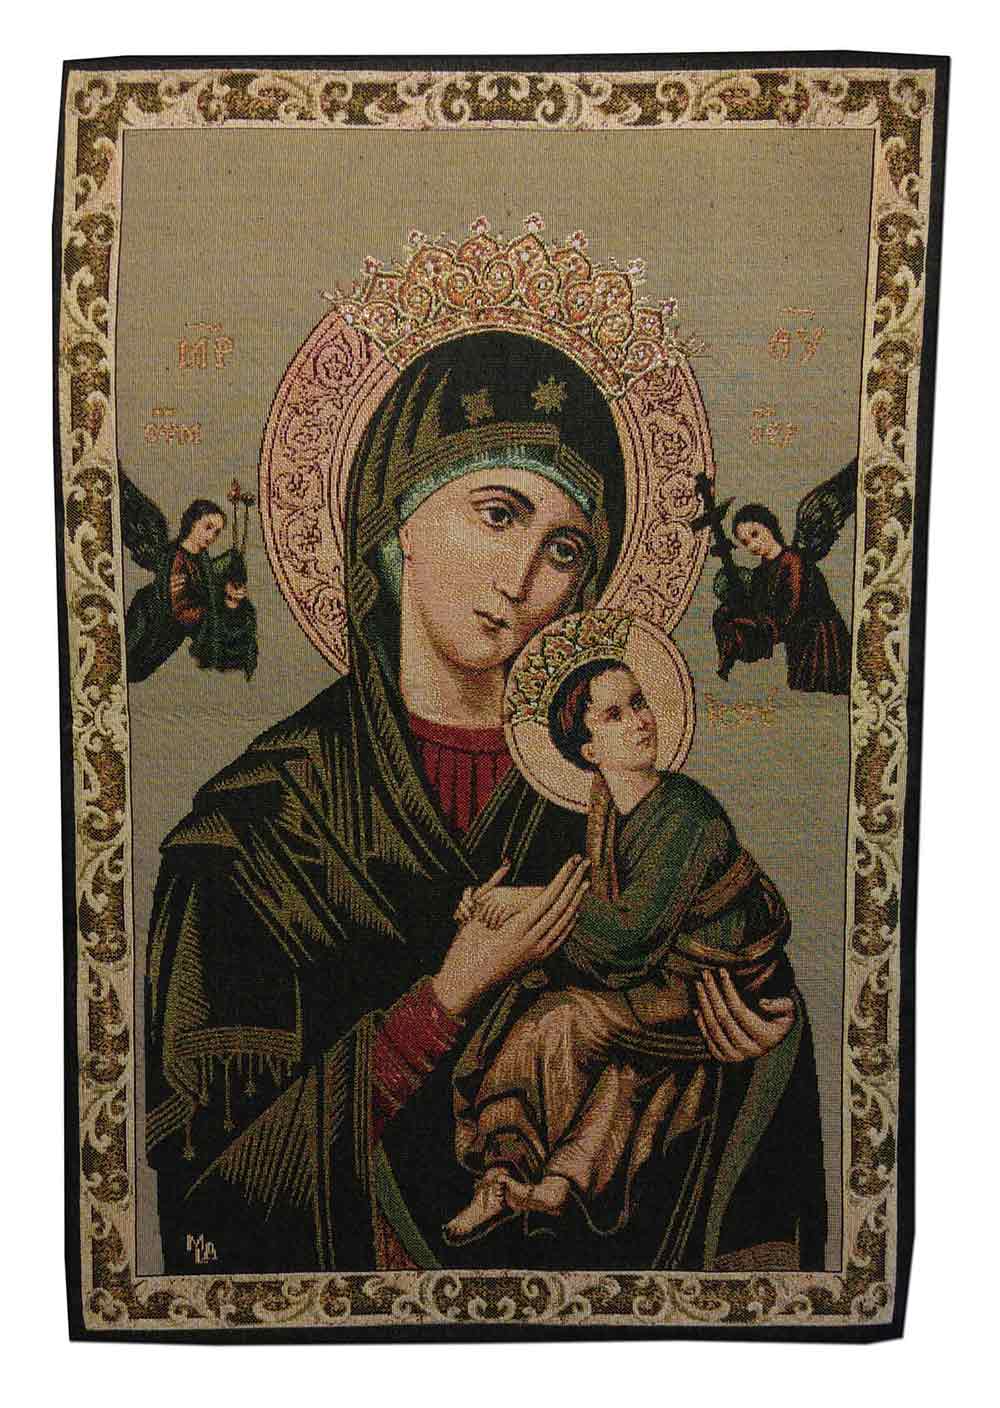 Tapestry Byzantine Icon Virgin Perpetual Help